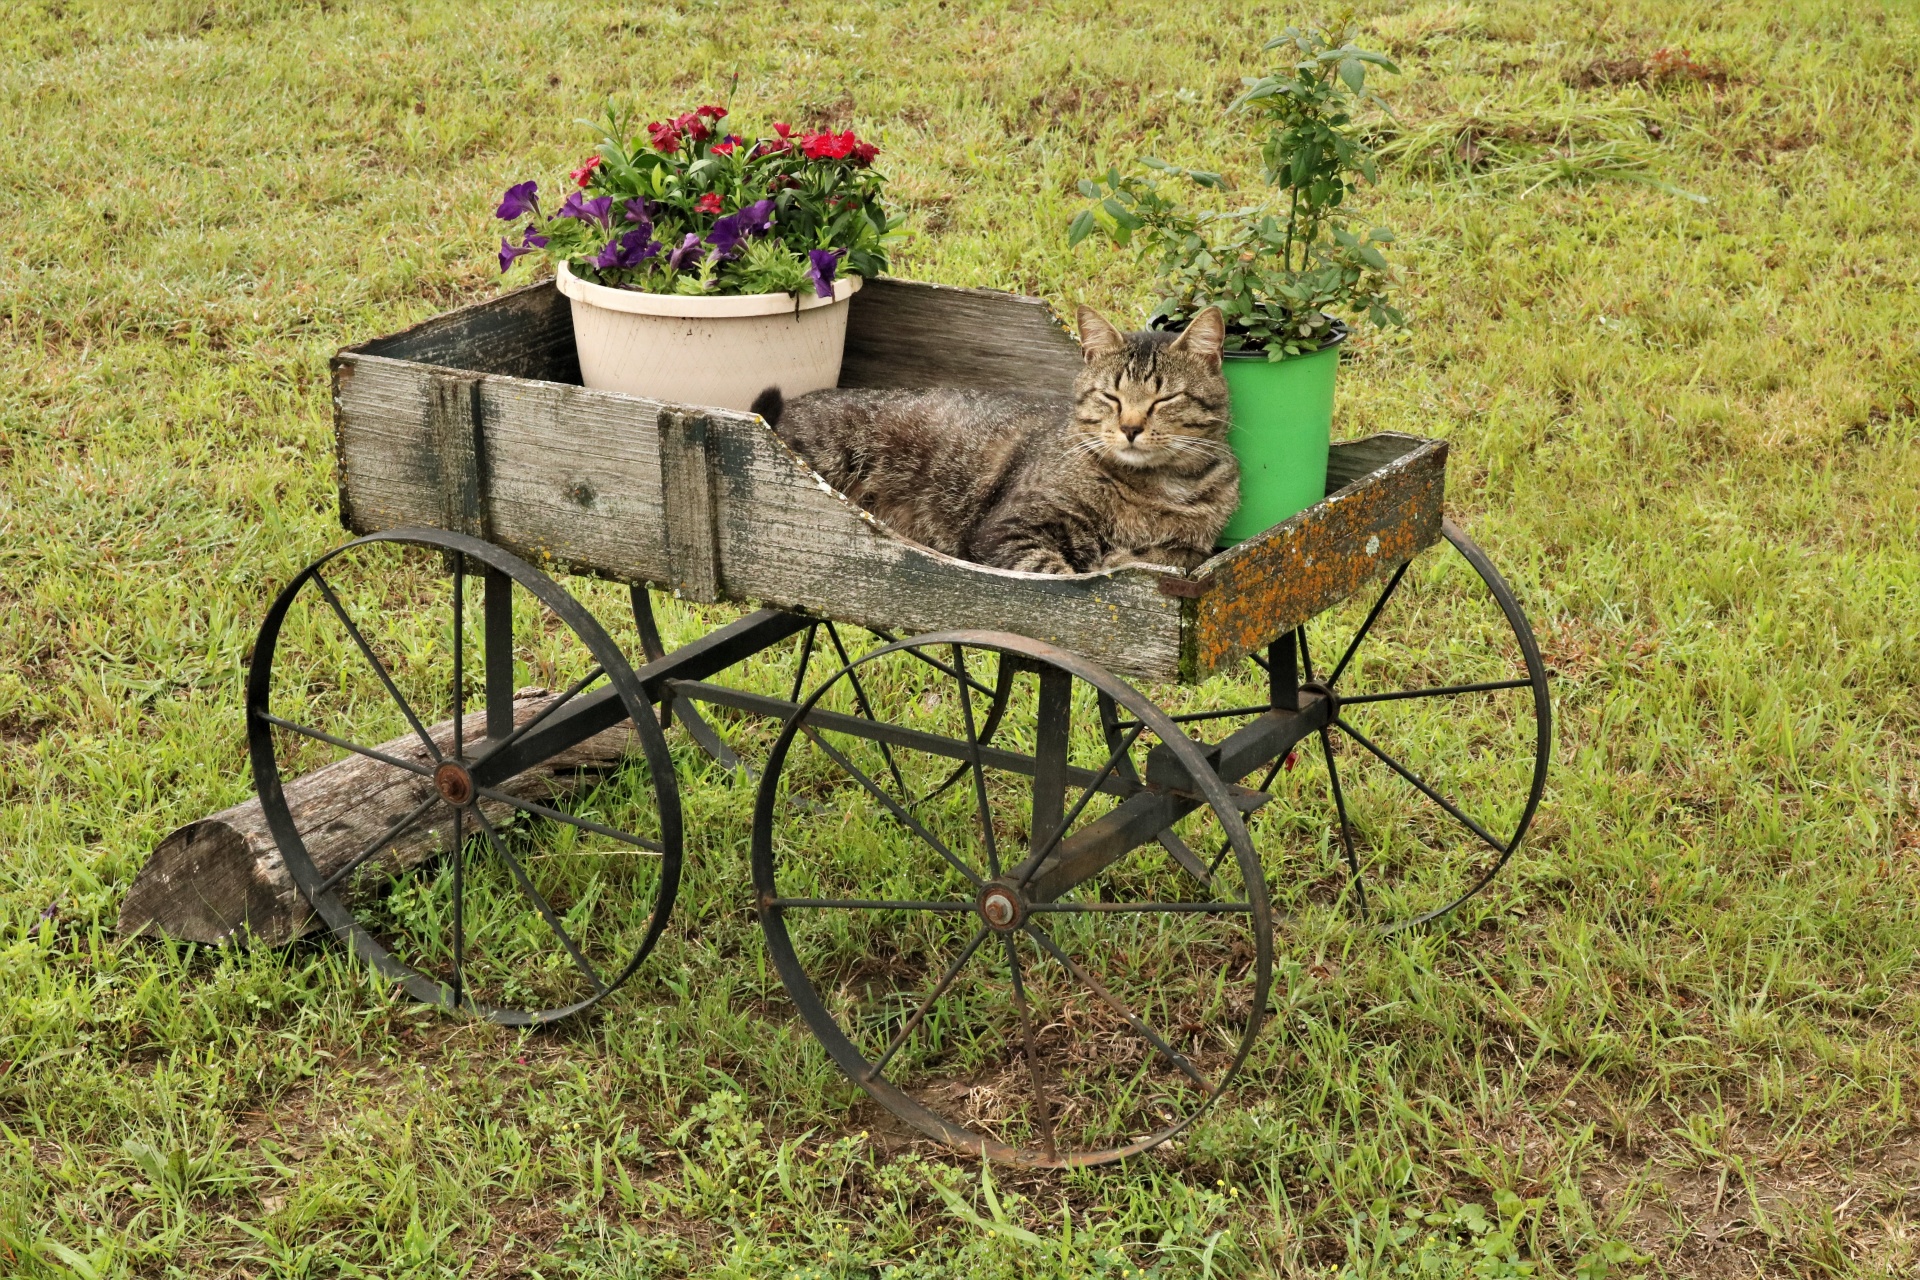 A gray tabby cat is sleeping in an old wooden flower cart, with flowers.